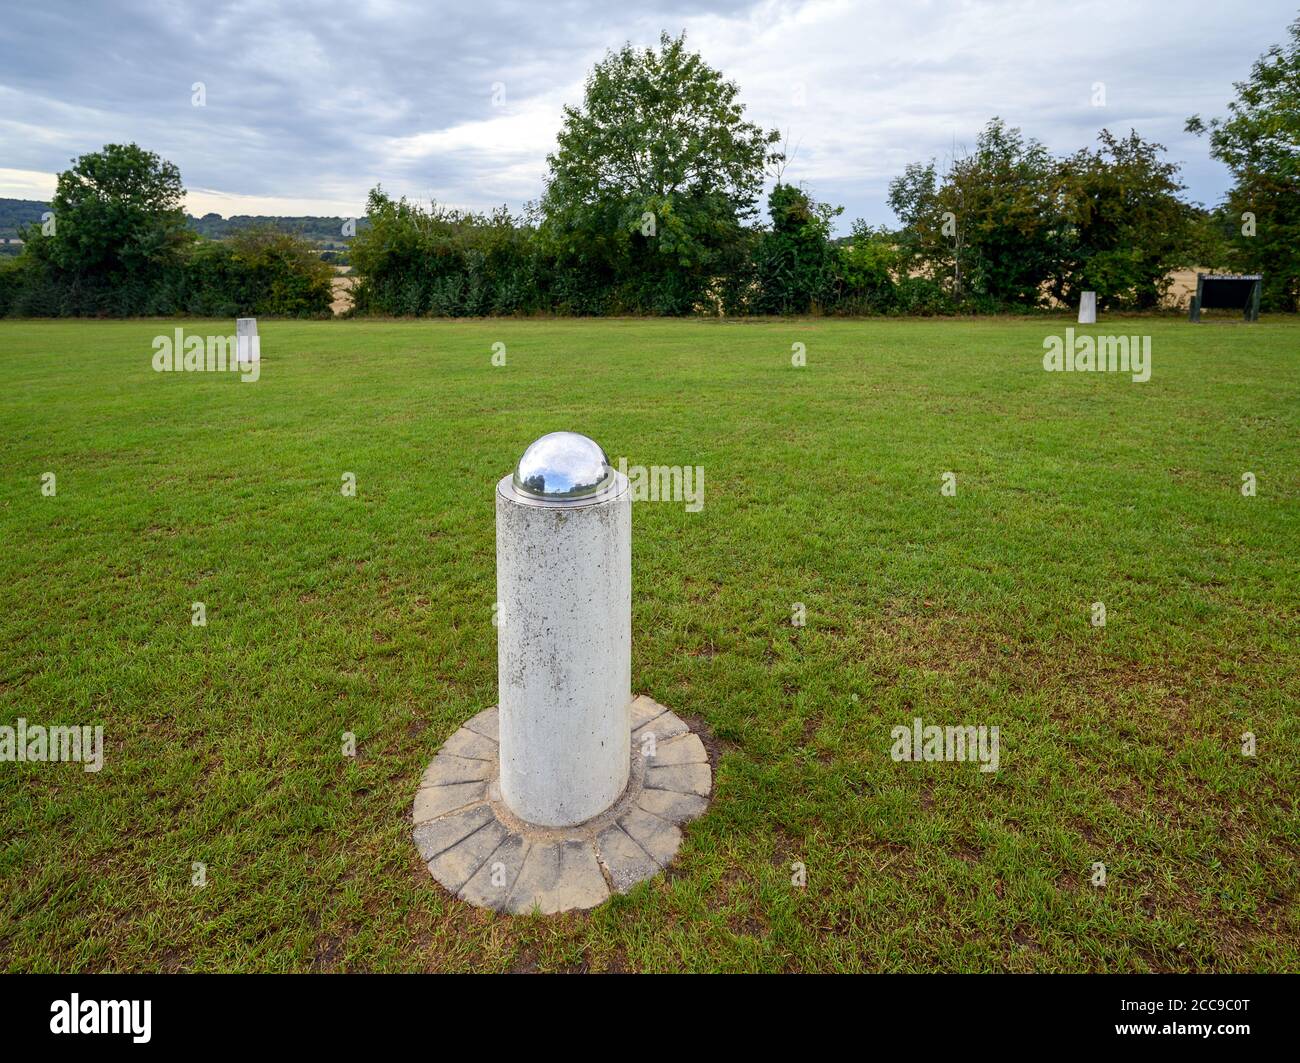 The Otford Solar System in Otford, Kent, UK. This scale model of the solar system is in the recreation ground with outer planets around the village. Stock Photo